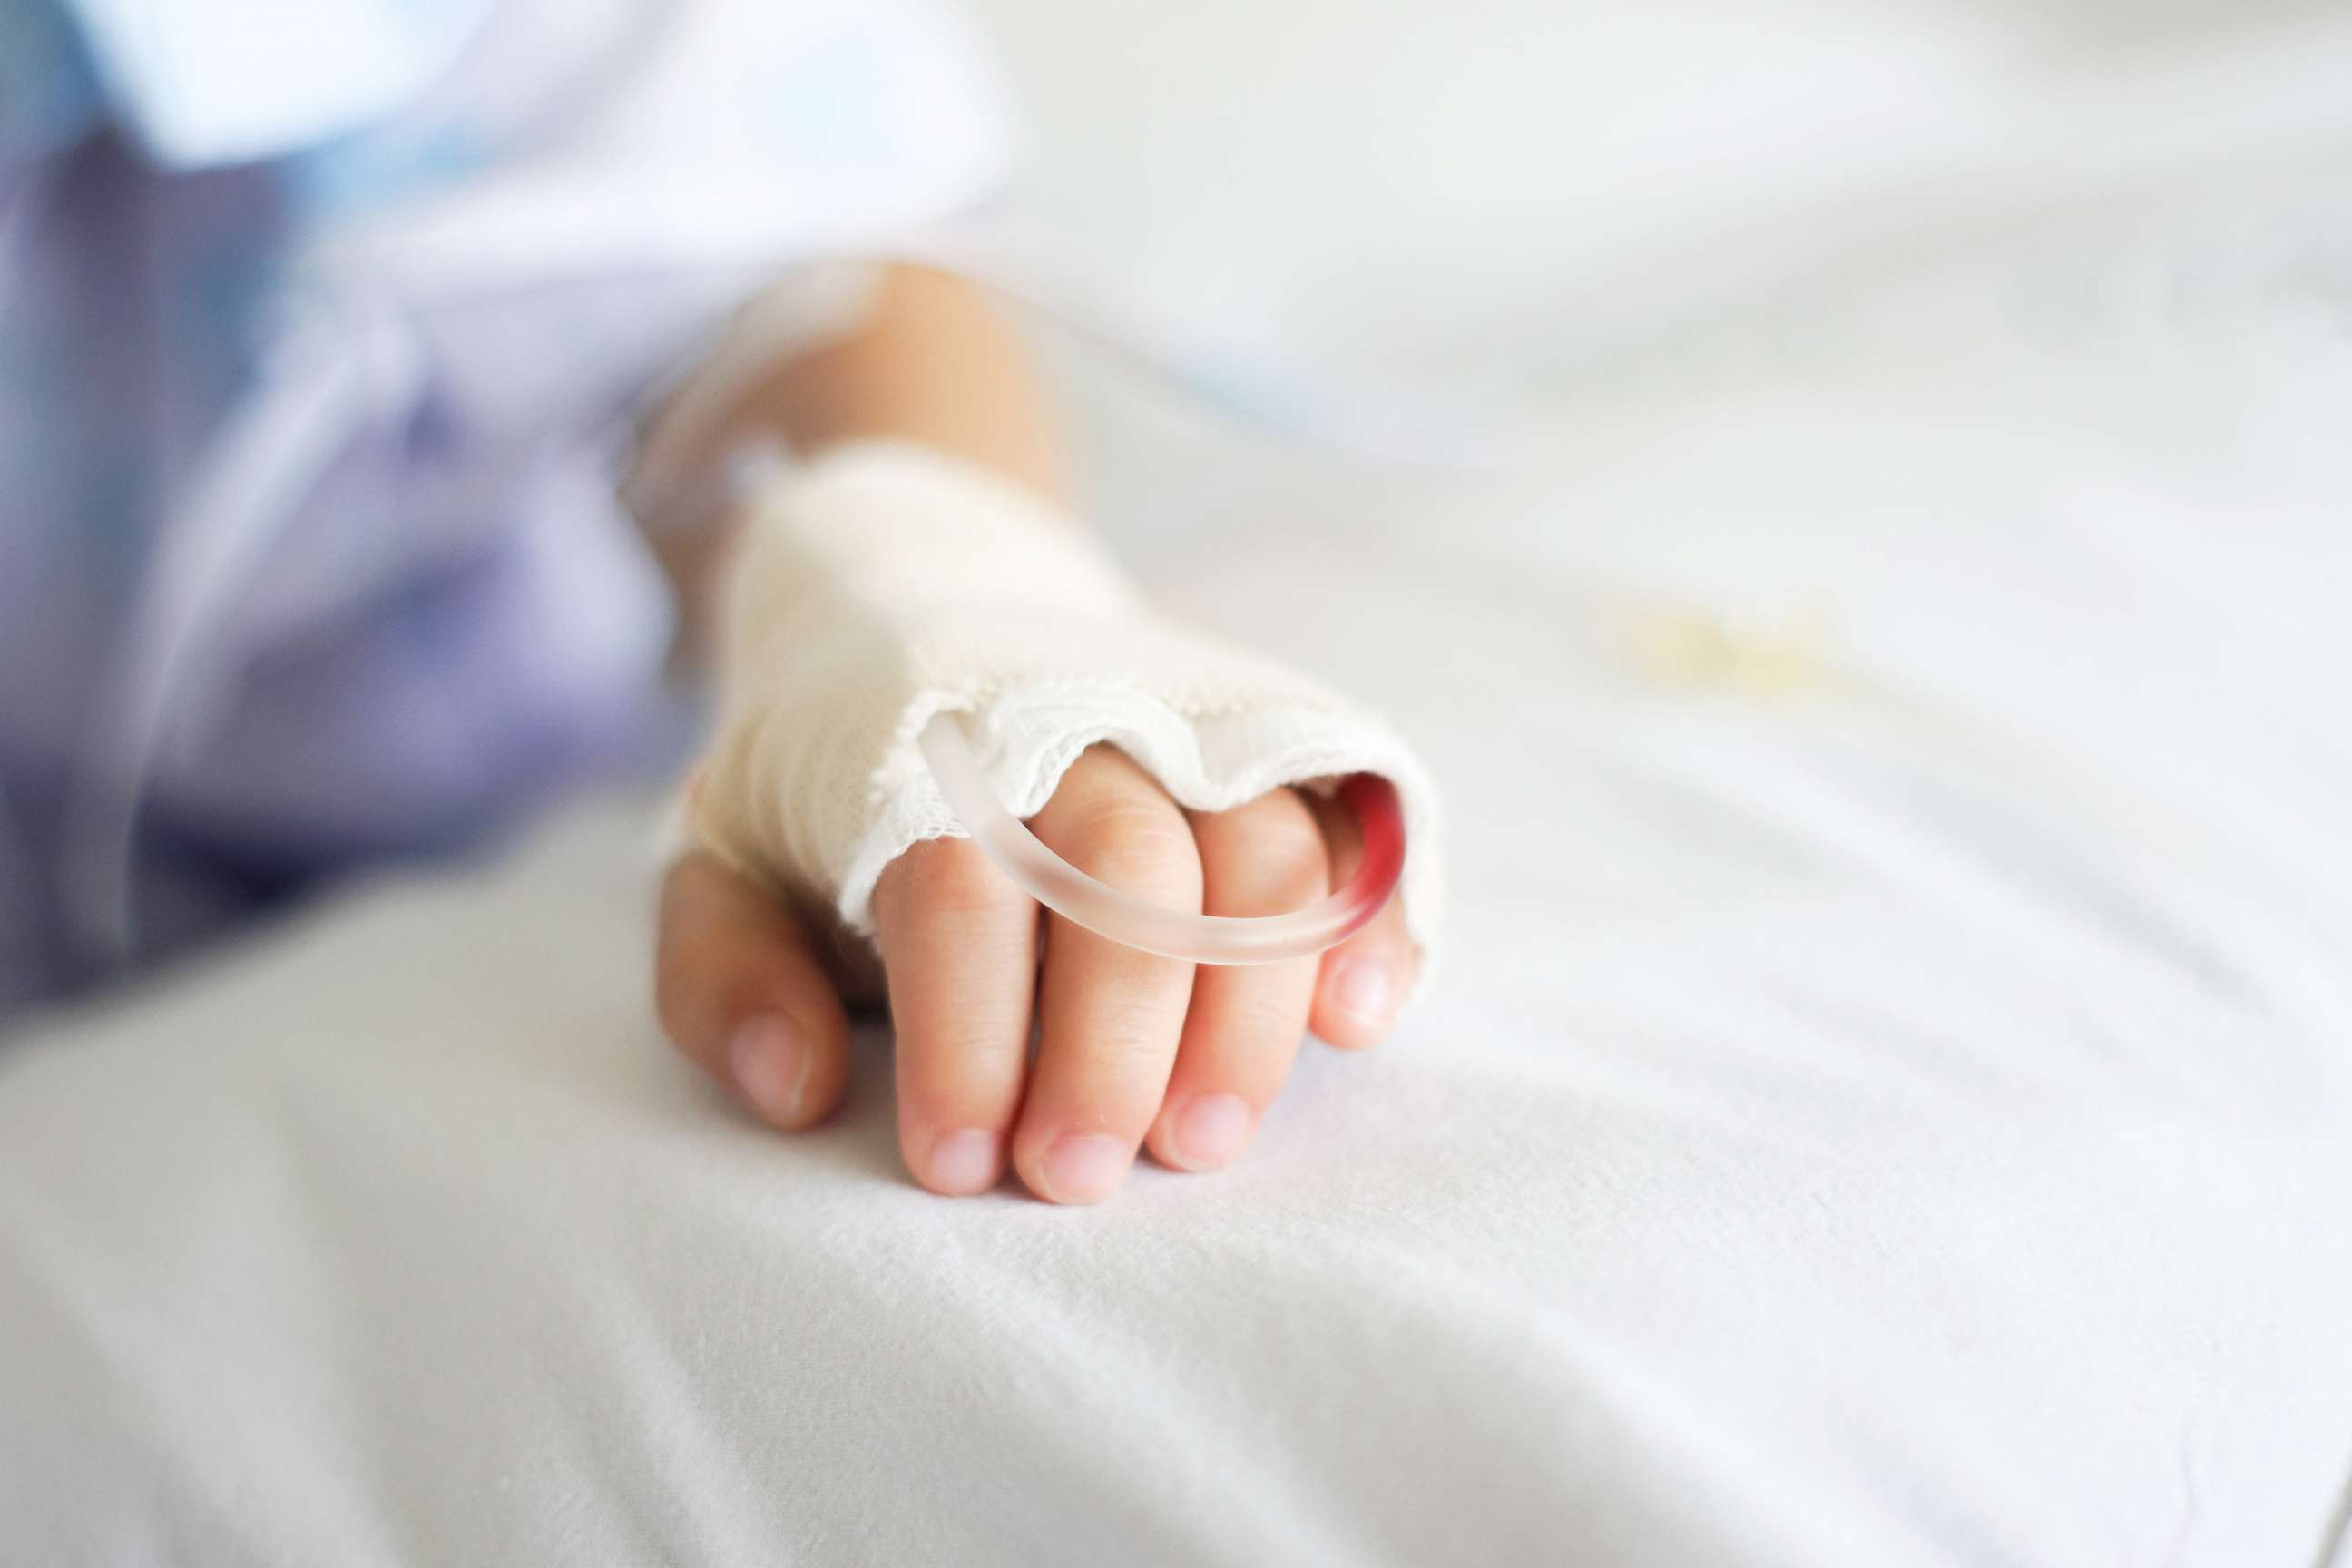 PHOTO: Stock photo of a child in the hospital.